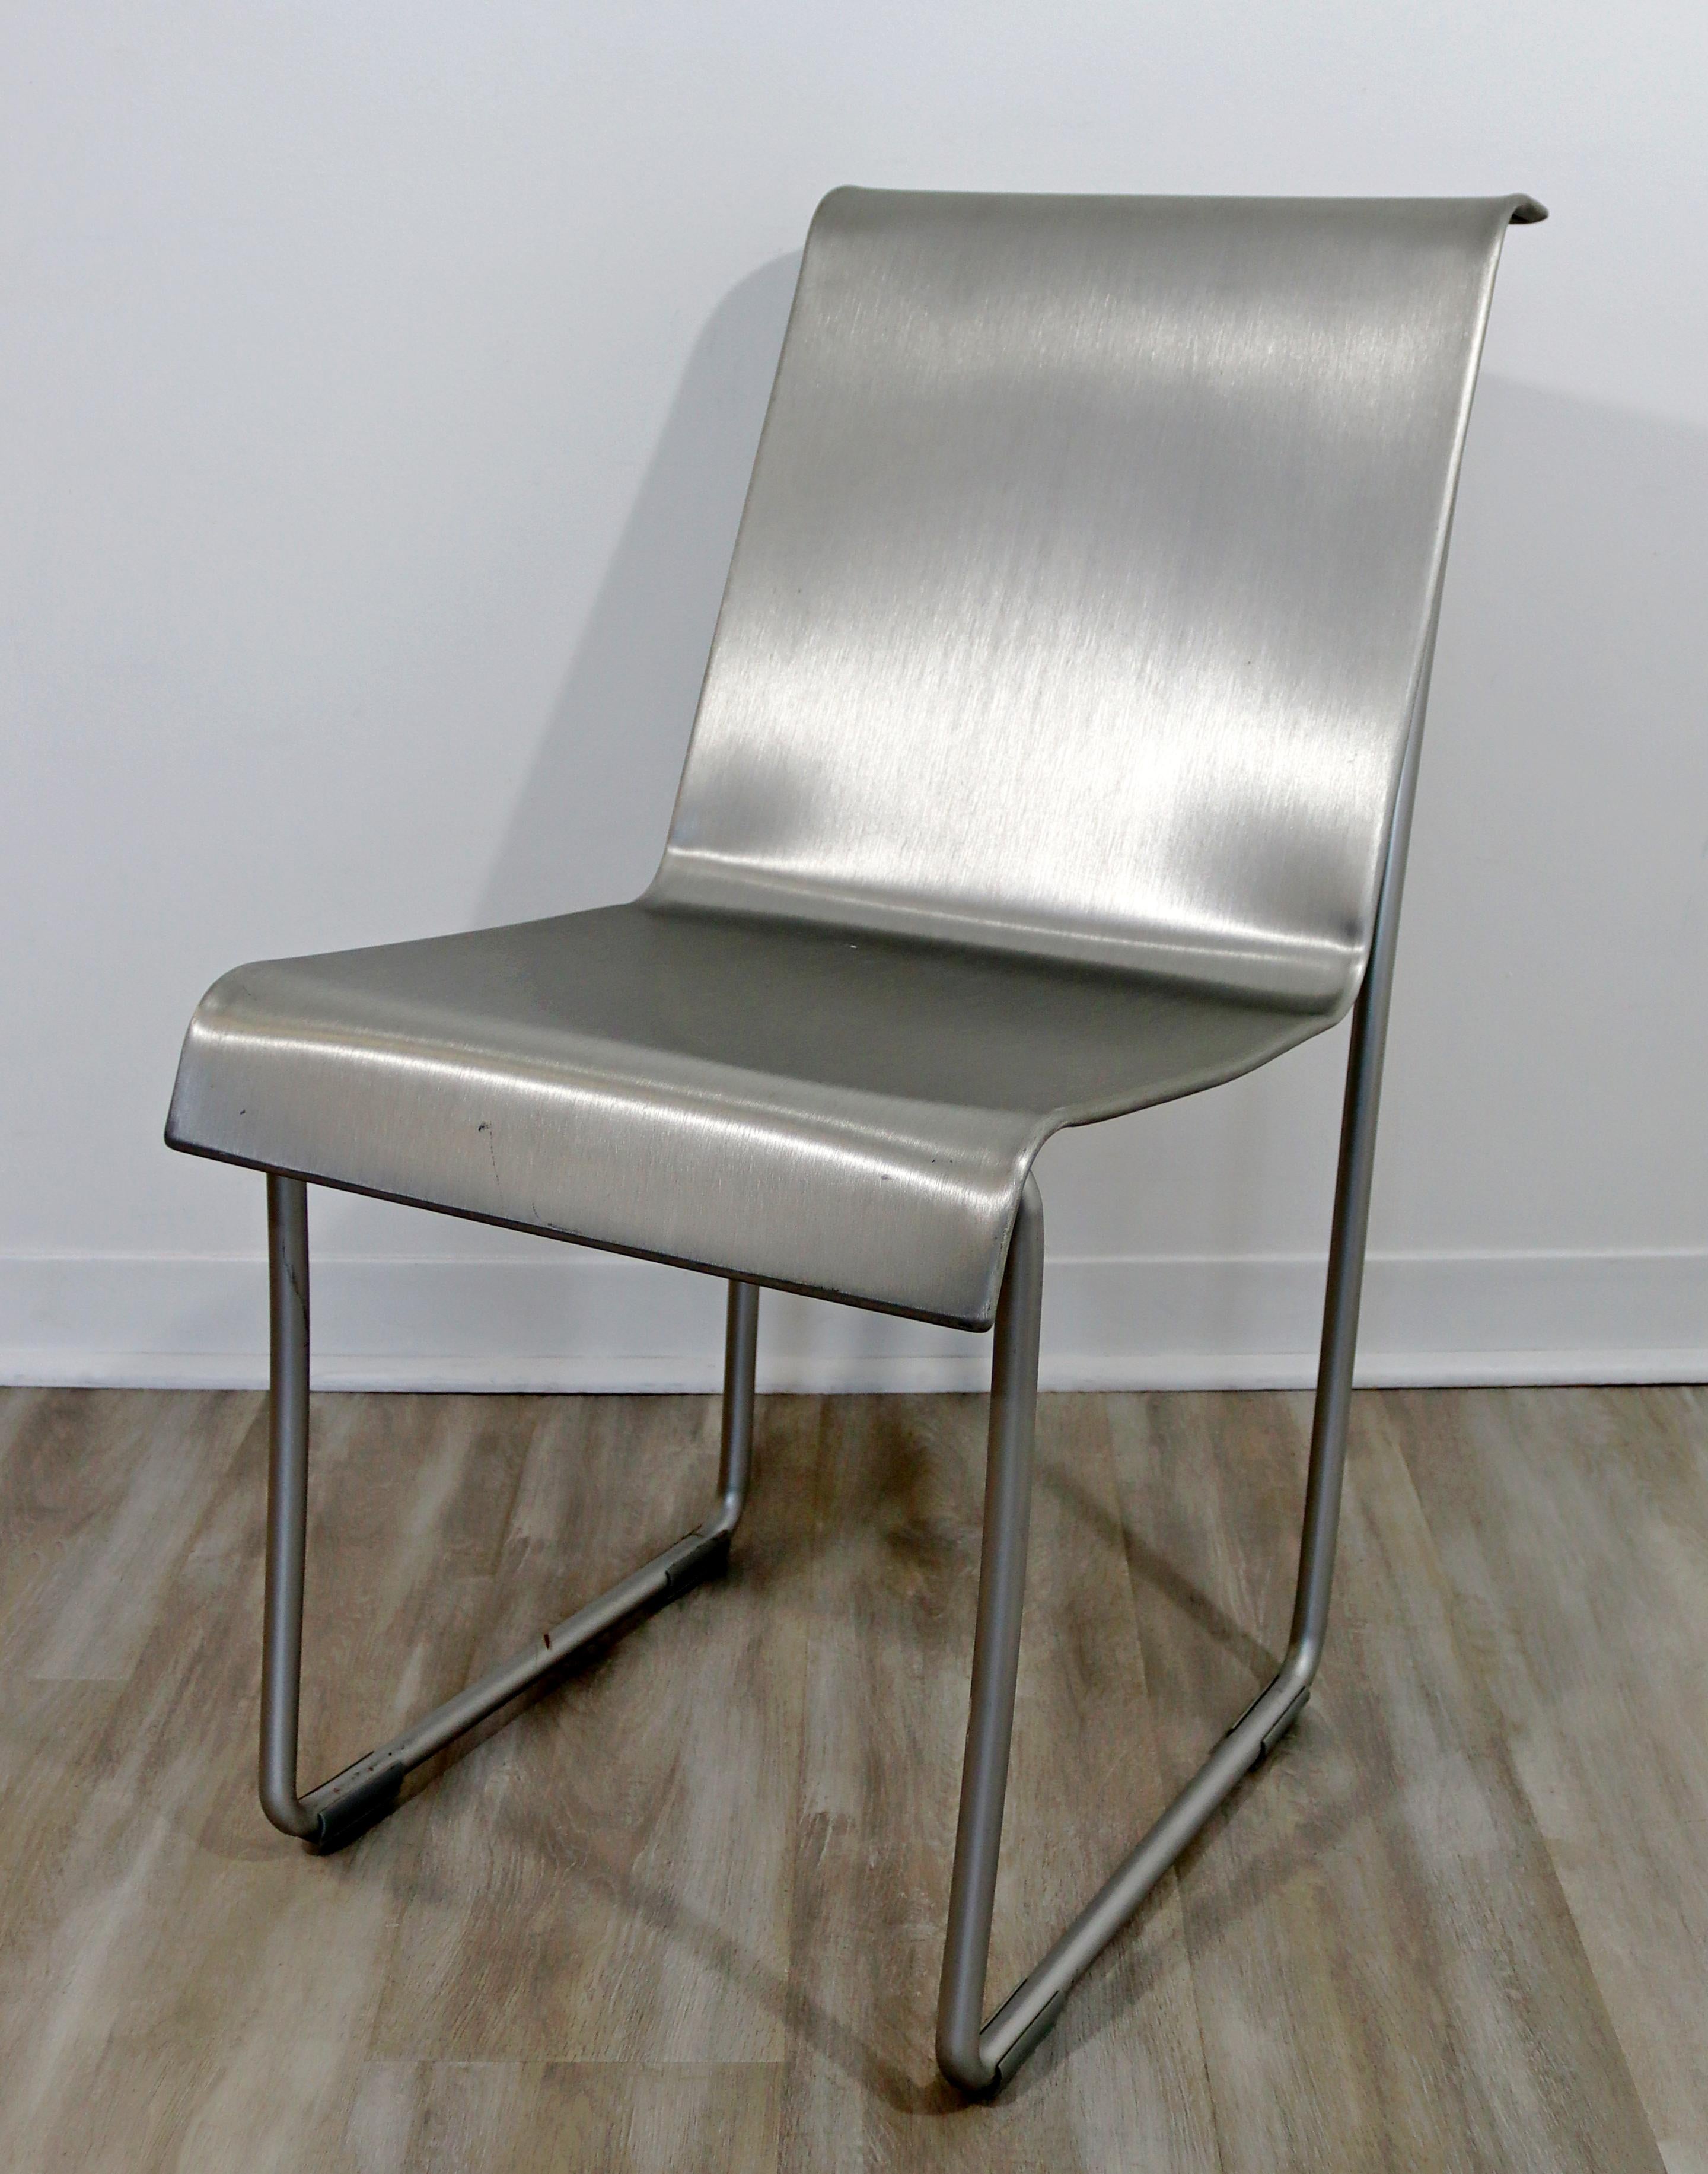 Contemporary Modernist Emeco Superlight Brushed Aluminum Chair by Frank Gehry In Good Condition In Keego Harbor, MI